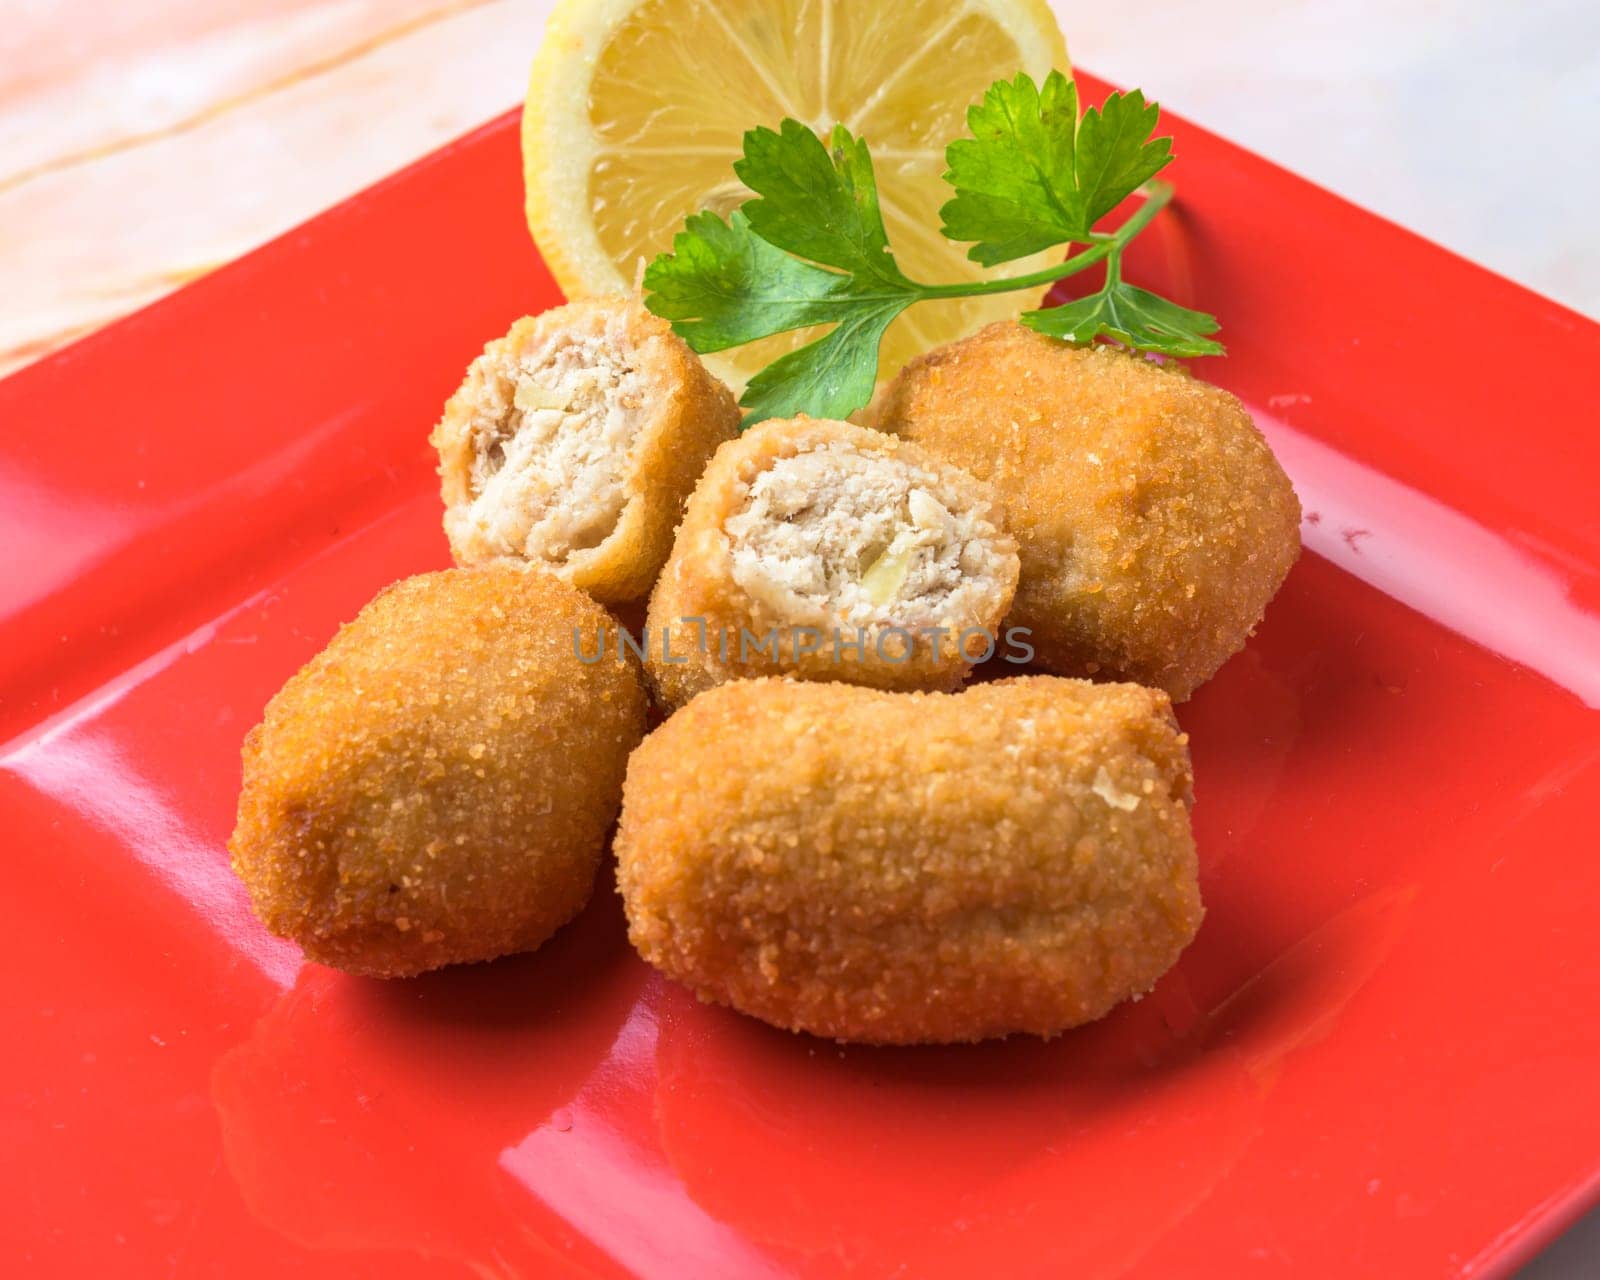 Fried croquettes served with a lemon wedge and parsley on a red plate, typical food, typical mediterranean mallorcan cuisine typical from balearic islands mallorca, spain,